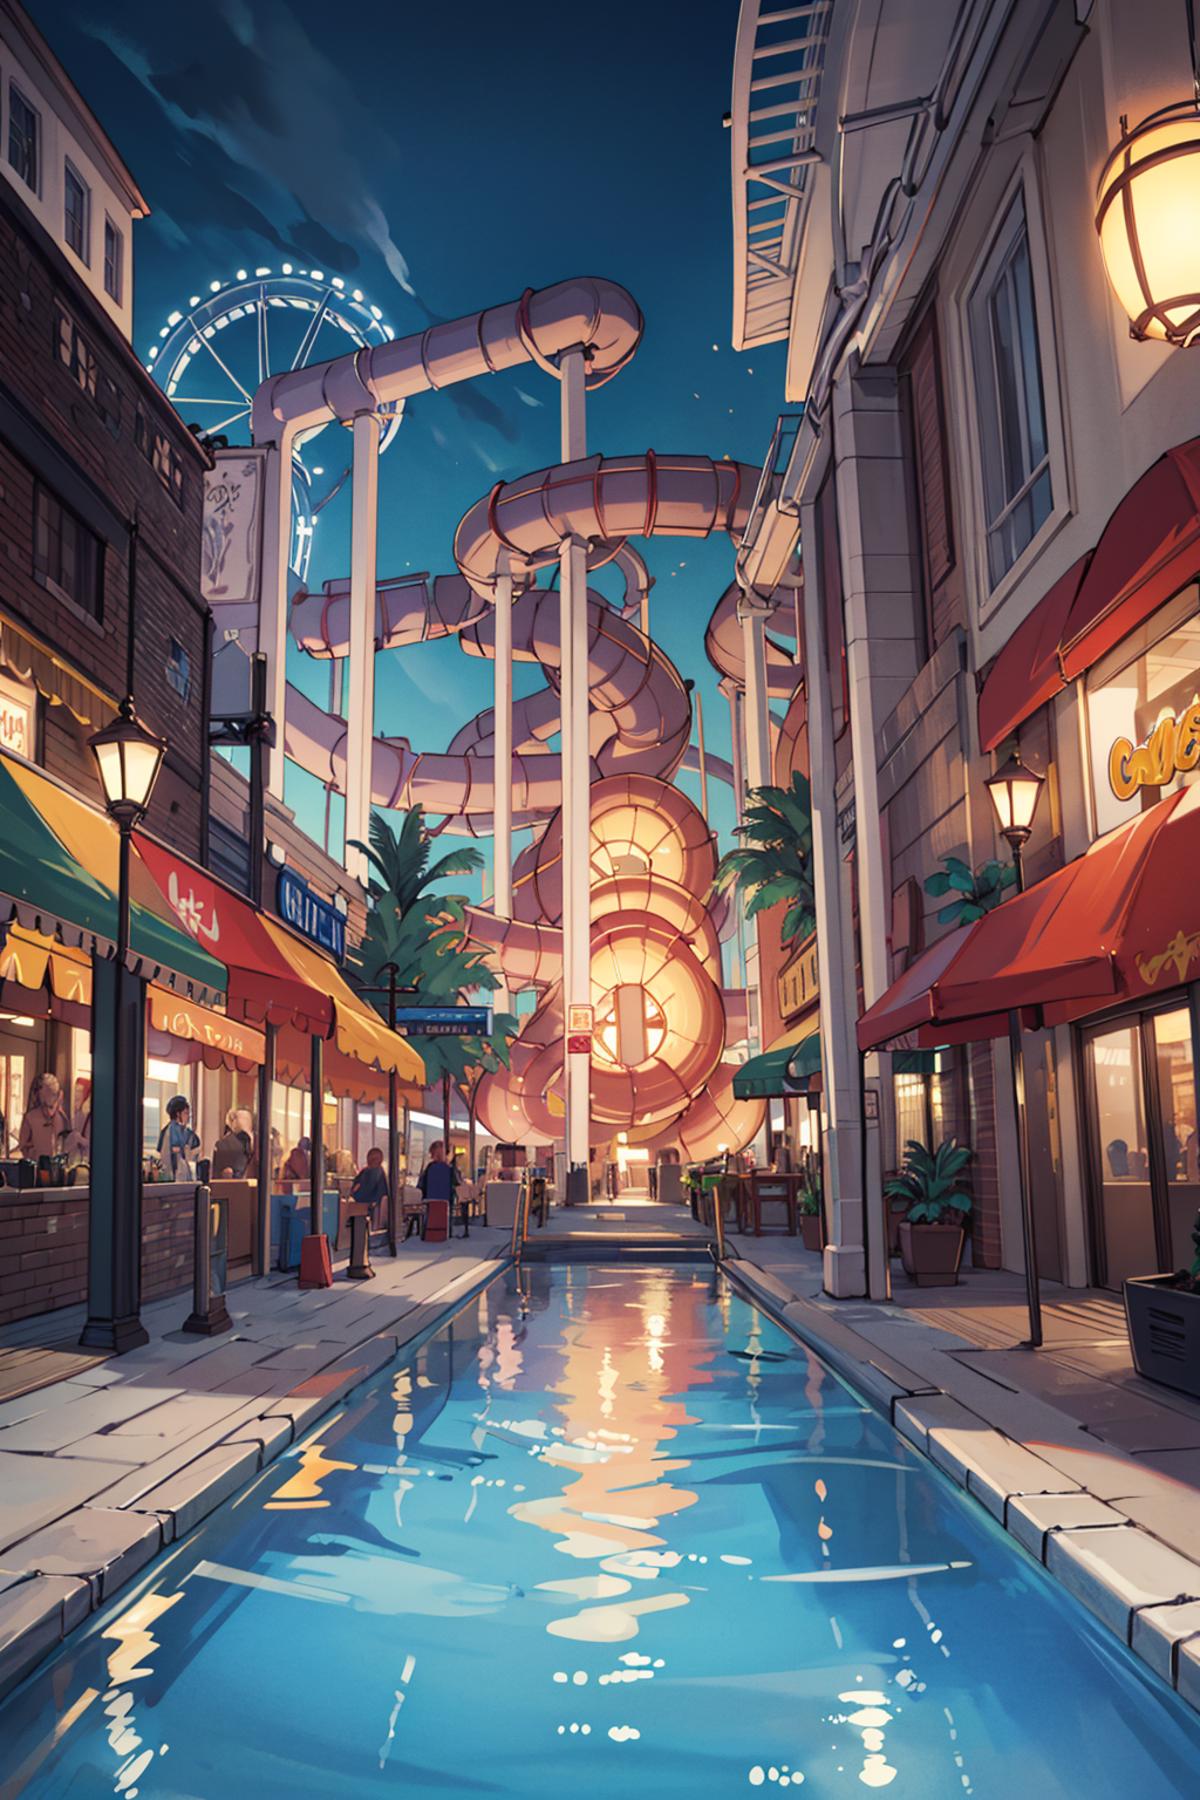 Waterpark | Background image by Tokugawa